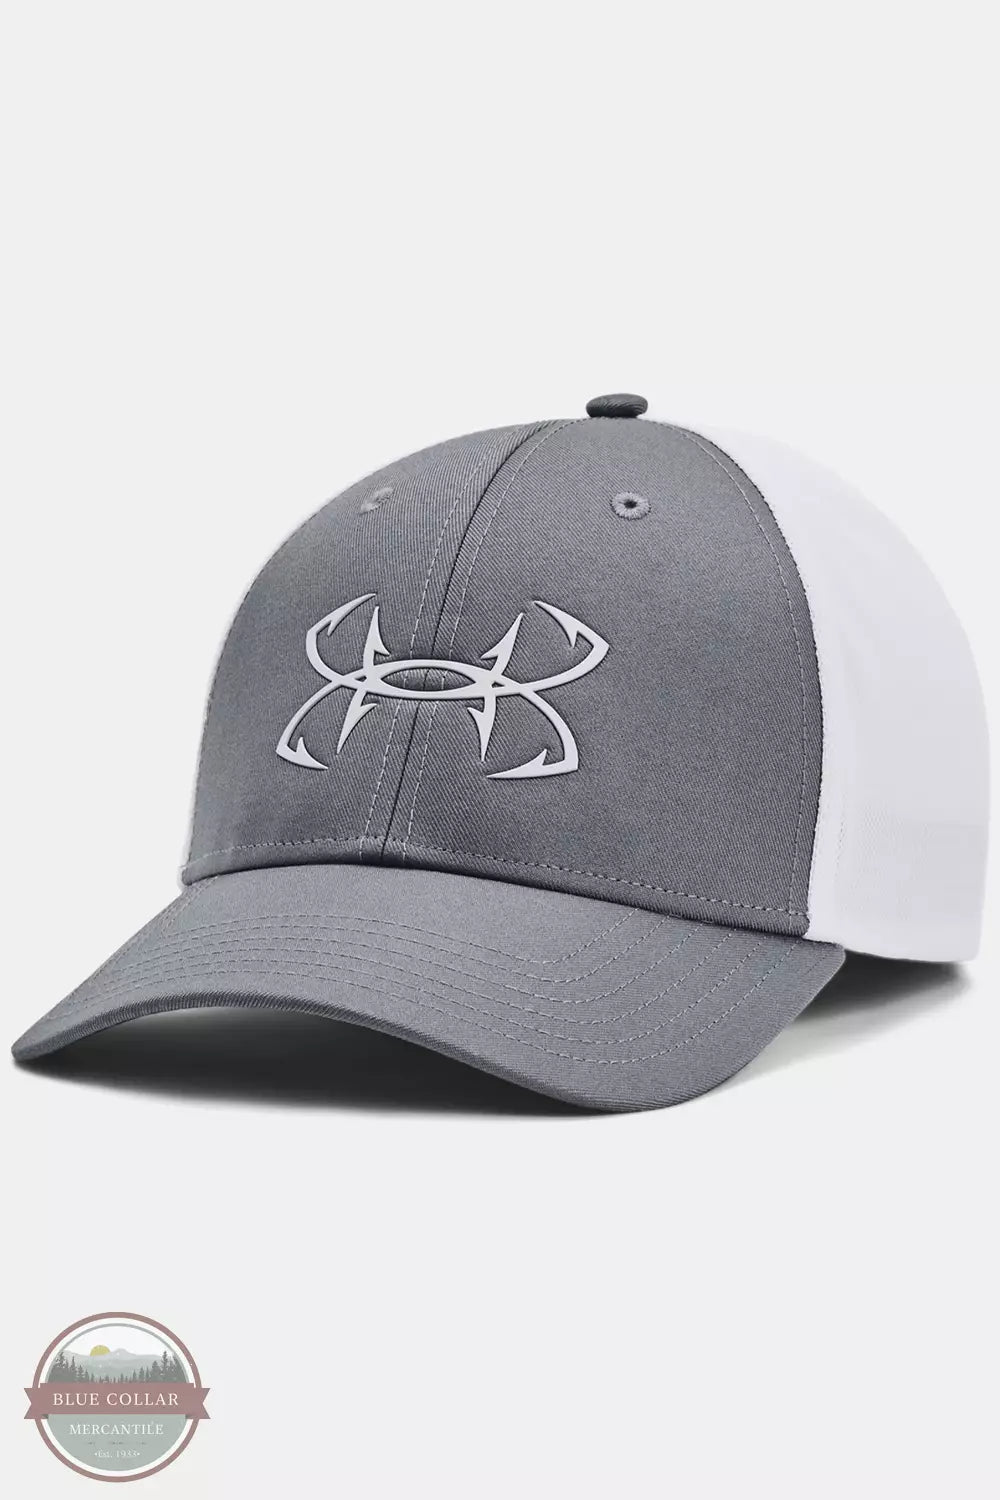 Under Armour 1376716 Fish Hunter Mesh Cap Pitch Gray / White Front View